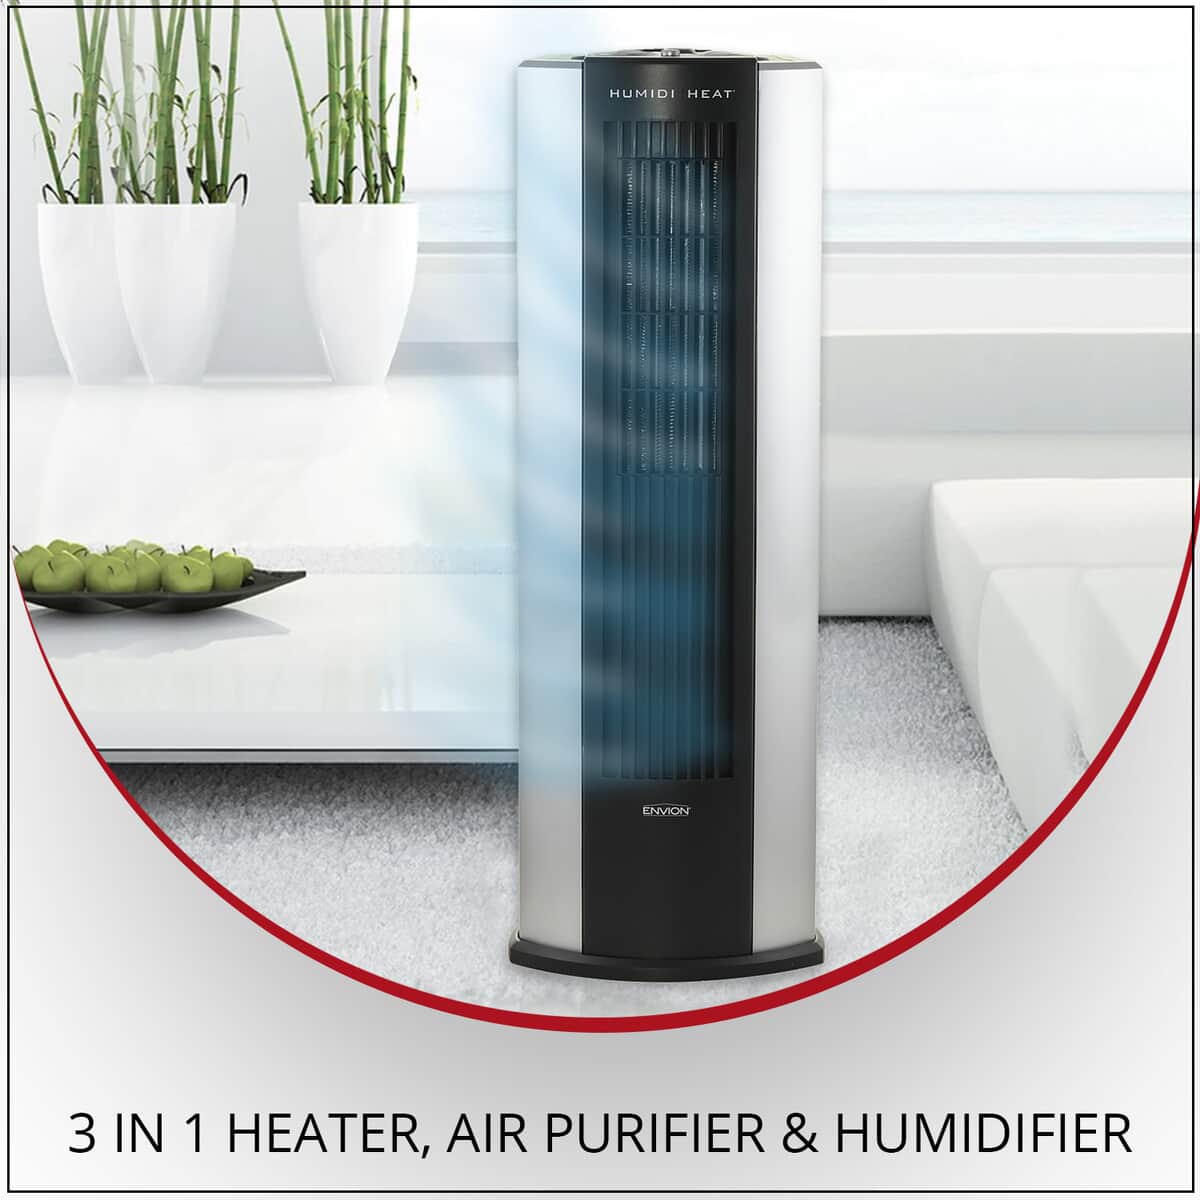 ENVION Black and Gray 3 in 1 Heater, Air Purifier & Humidifier image number 1